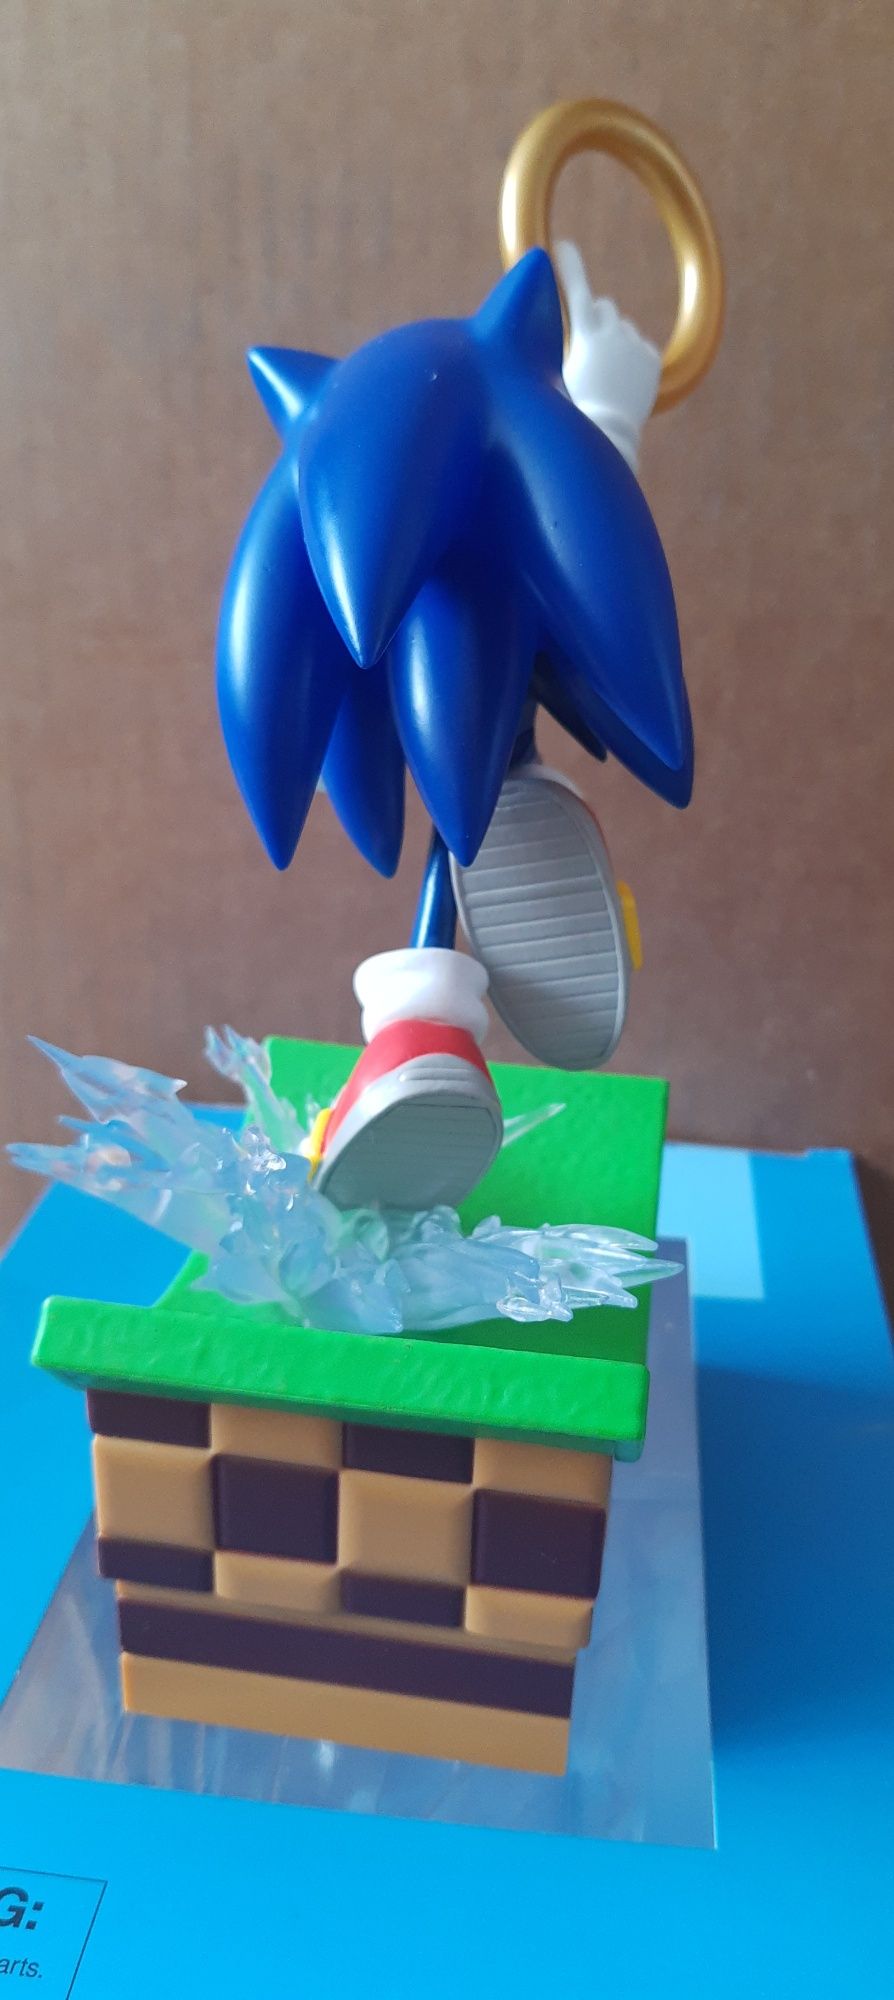 Sonic The Hedgehog figurka Diamond Select Gallery

PS4 Xbox One PC PS3